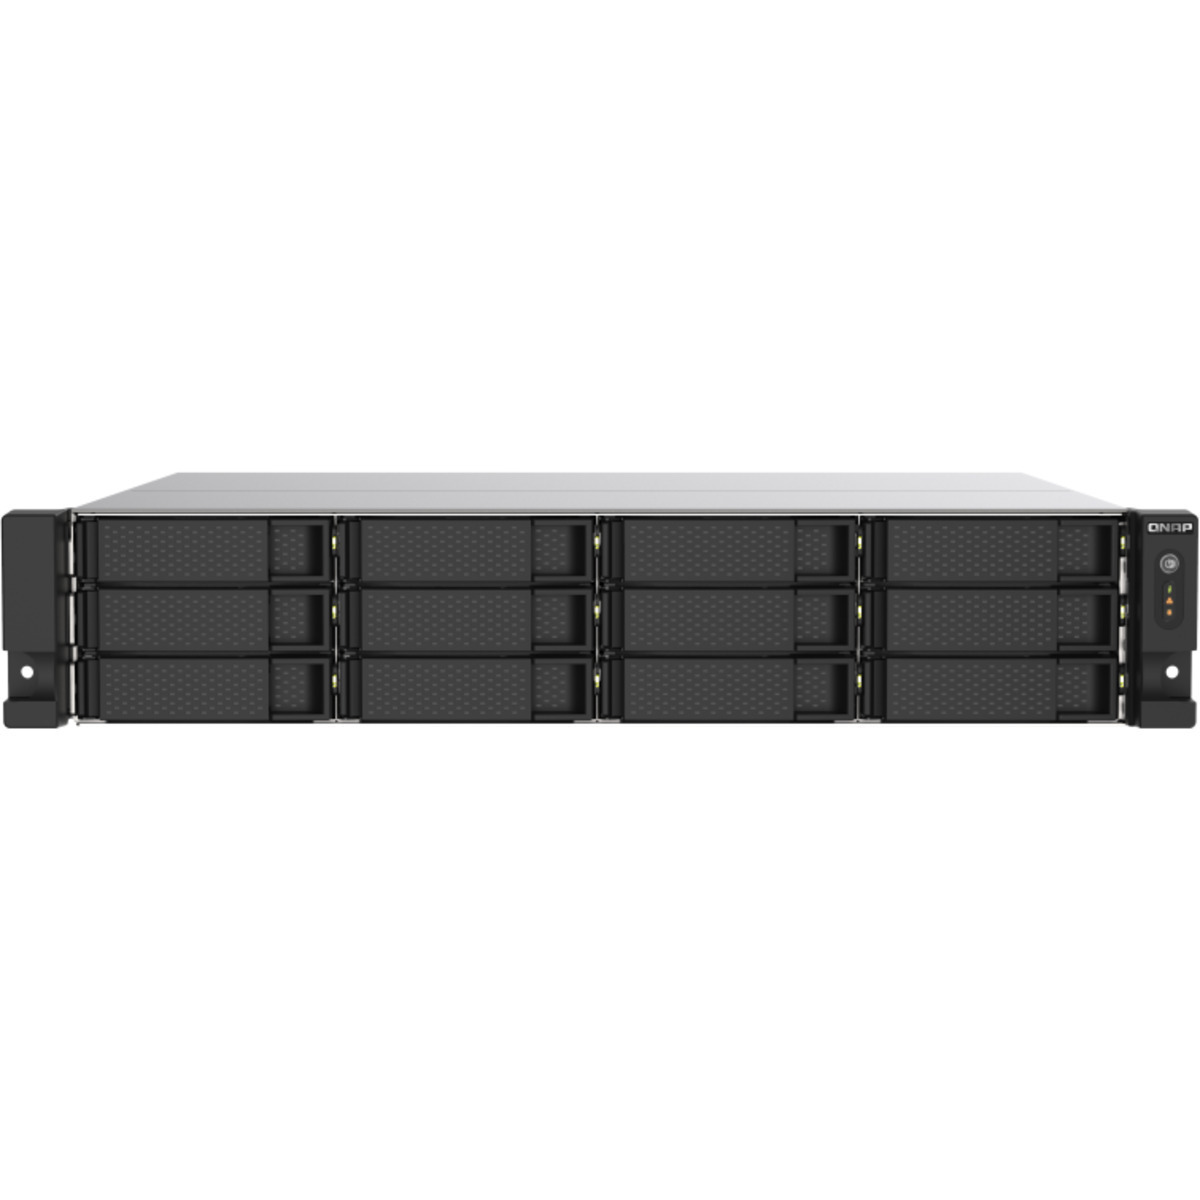 QNAP TS-1273AU-RP 11tb 12-Bay RackMount Multimedia / Power User / Business NAS - Network Attached Storage Device 11x1tb Crucial MX500 CT1000MX500SSD1 2.5 560/510MB/s SATA 6Gb/s SSD CONSUMER Class Drives Installed - Burn-In Tested - FREE RAM UPGRADE TS-1273AU-RP